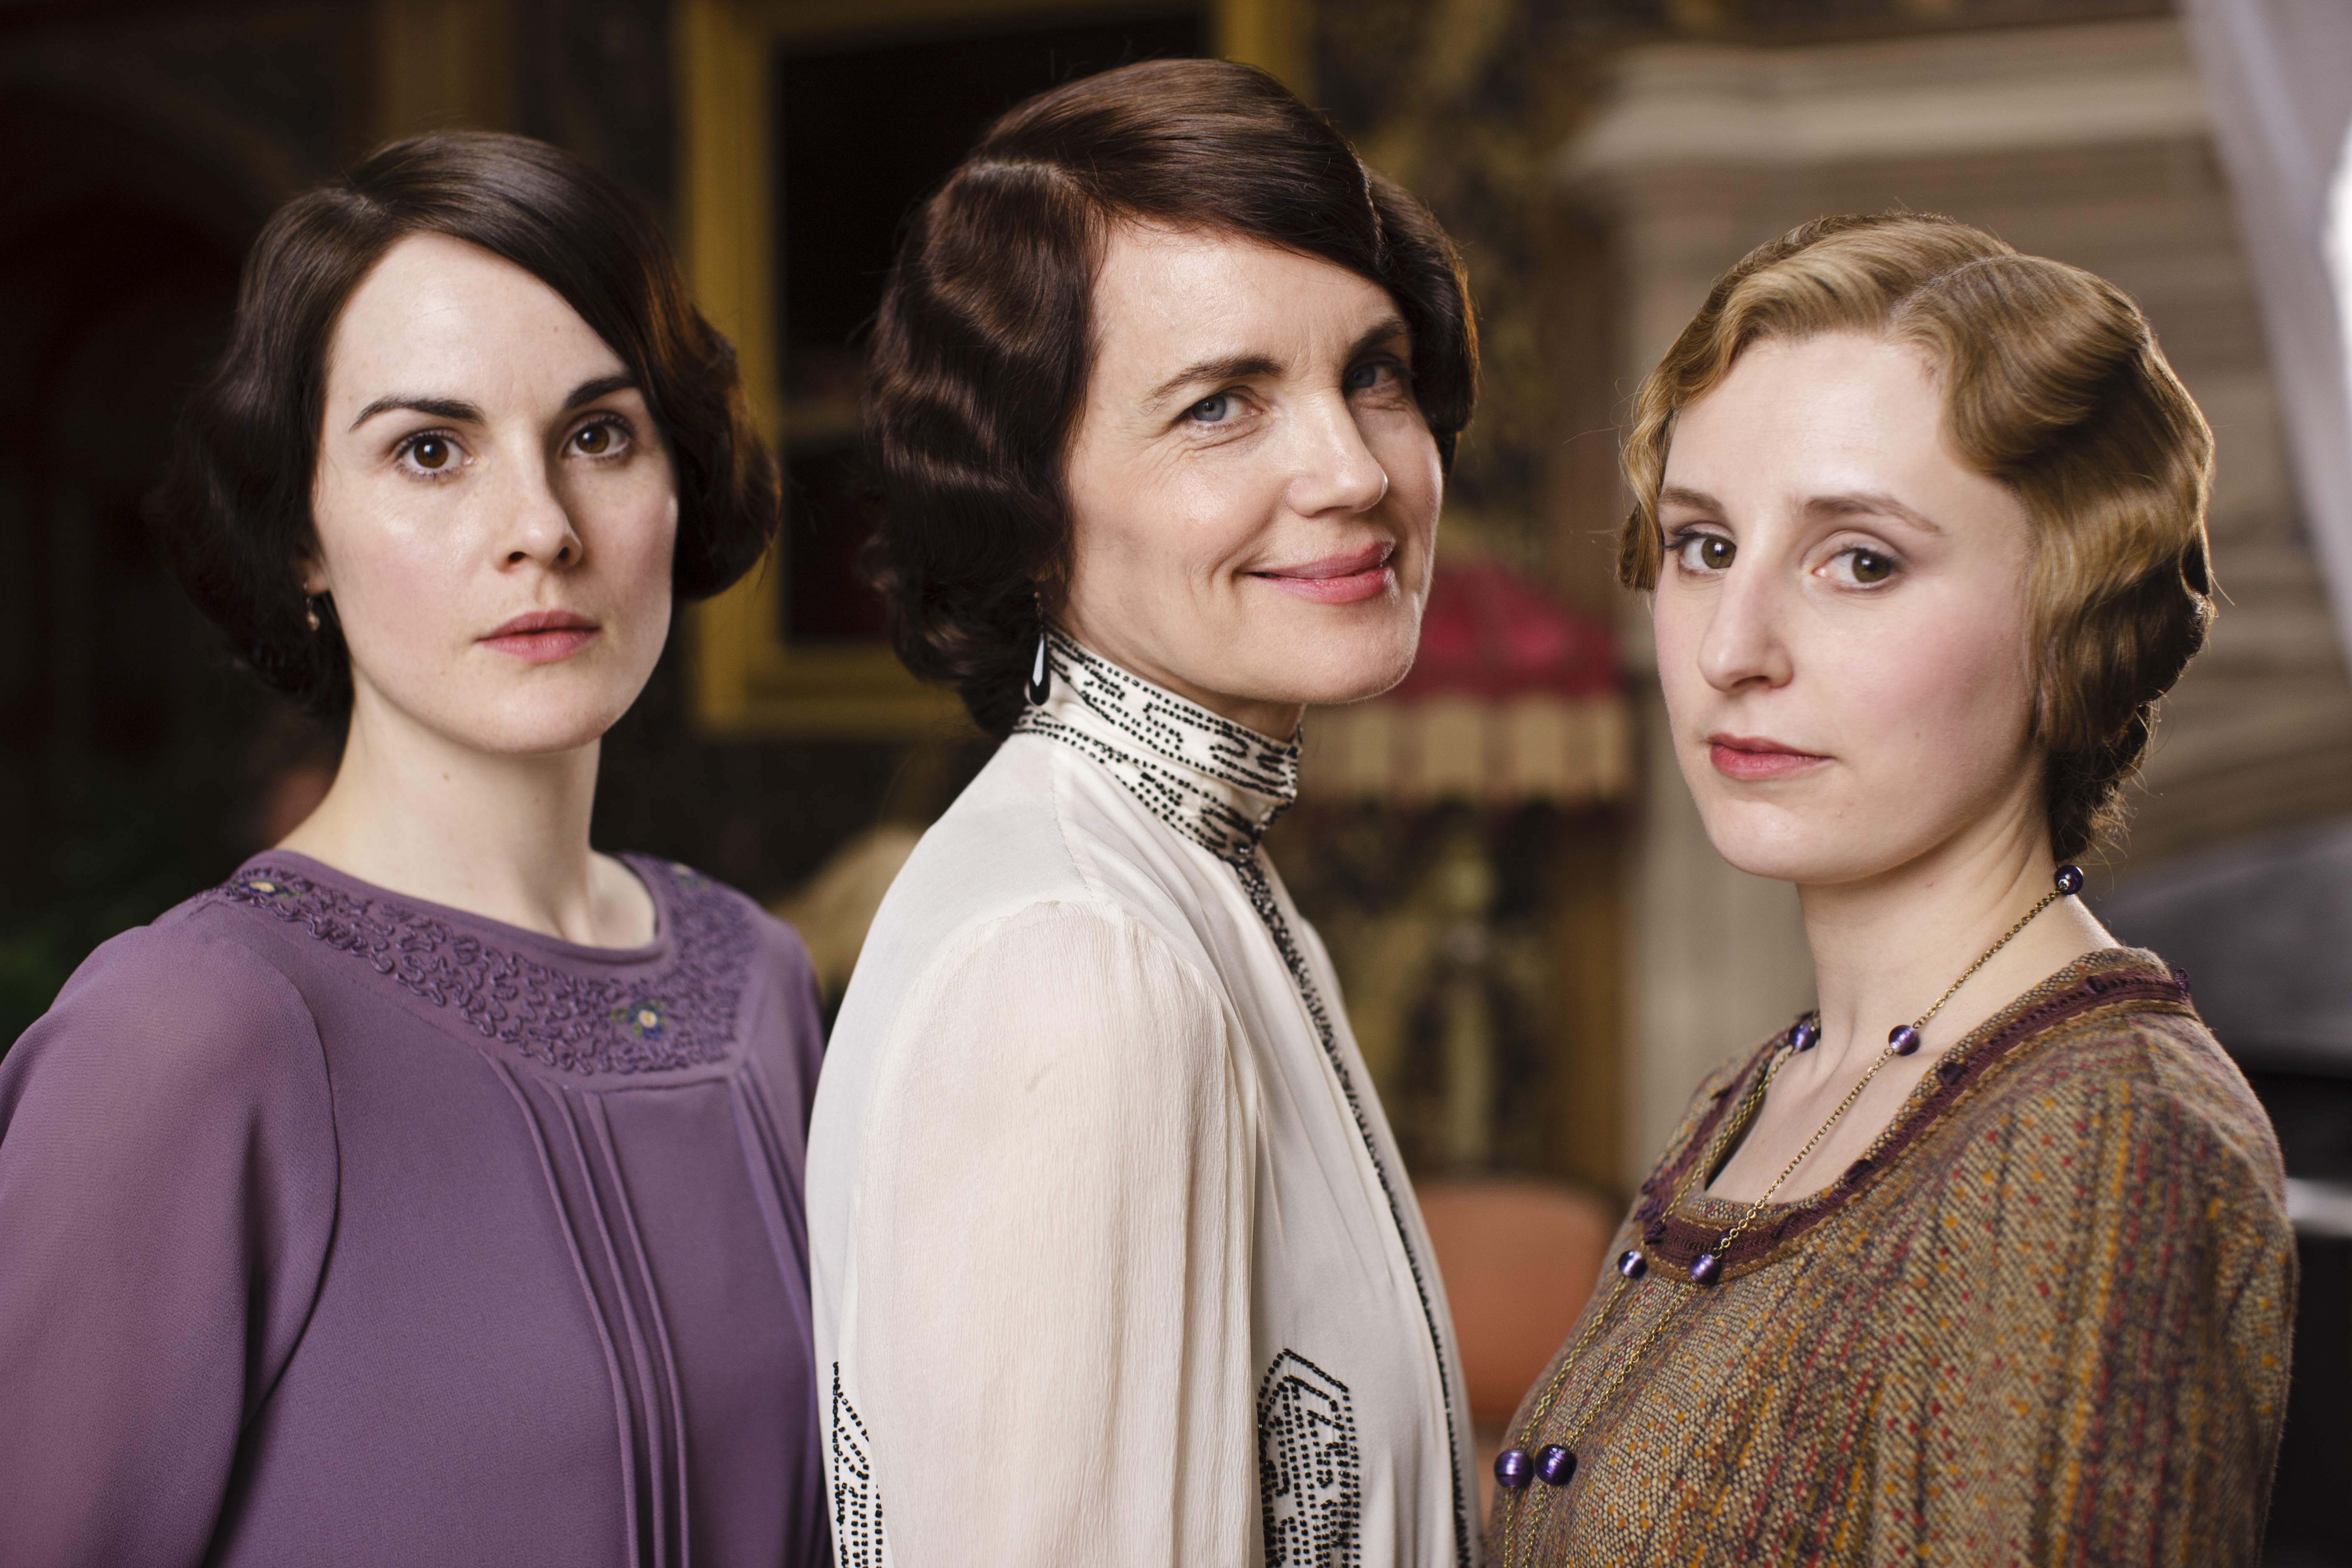 Mary, Cora and Edith. (Photo: Courtesy of ©Nick Briggs/Carnival Film and Television Limited 2013 for MASTERPIECE)